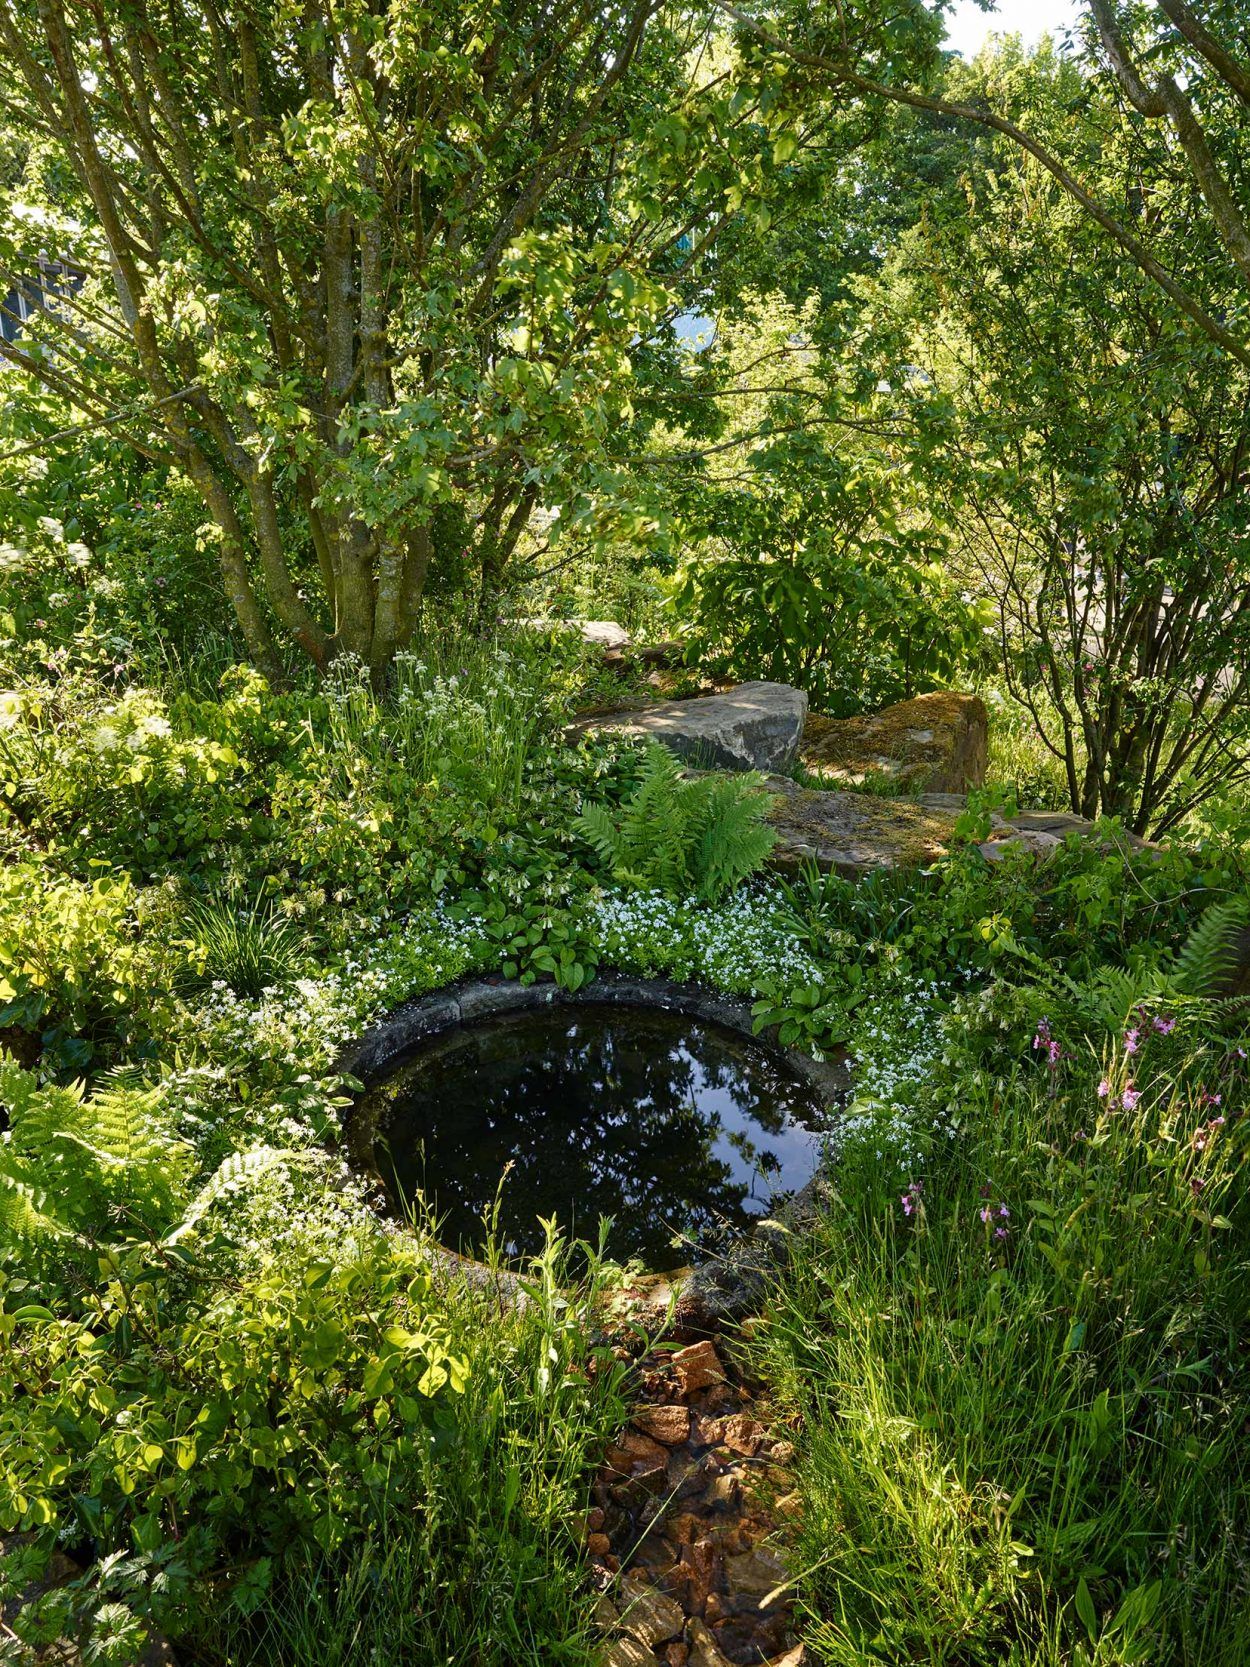 Creating a Tranquil Oasis: How to Design
and Maintain a Gorgeous Garden Pond